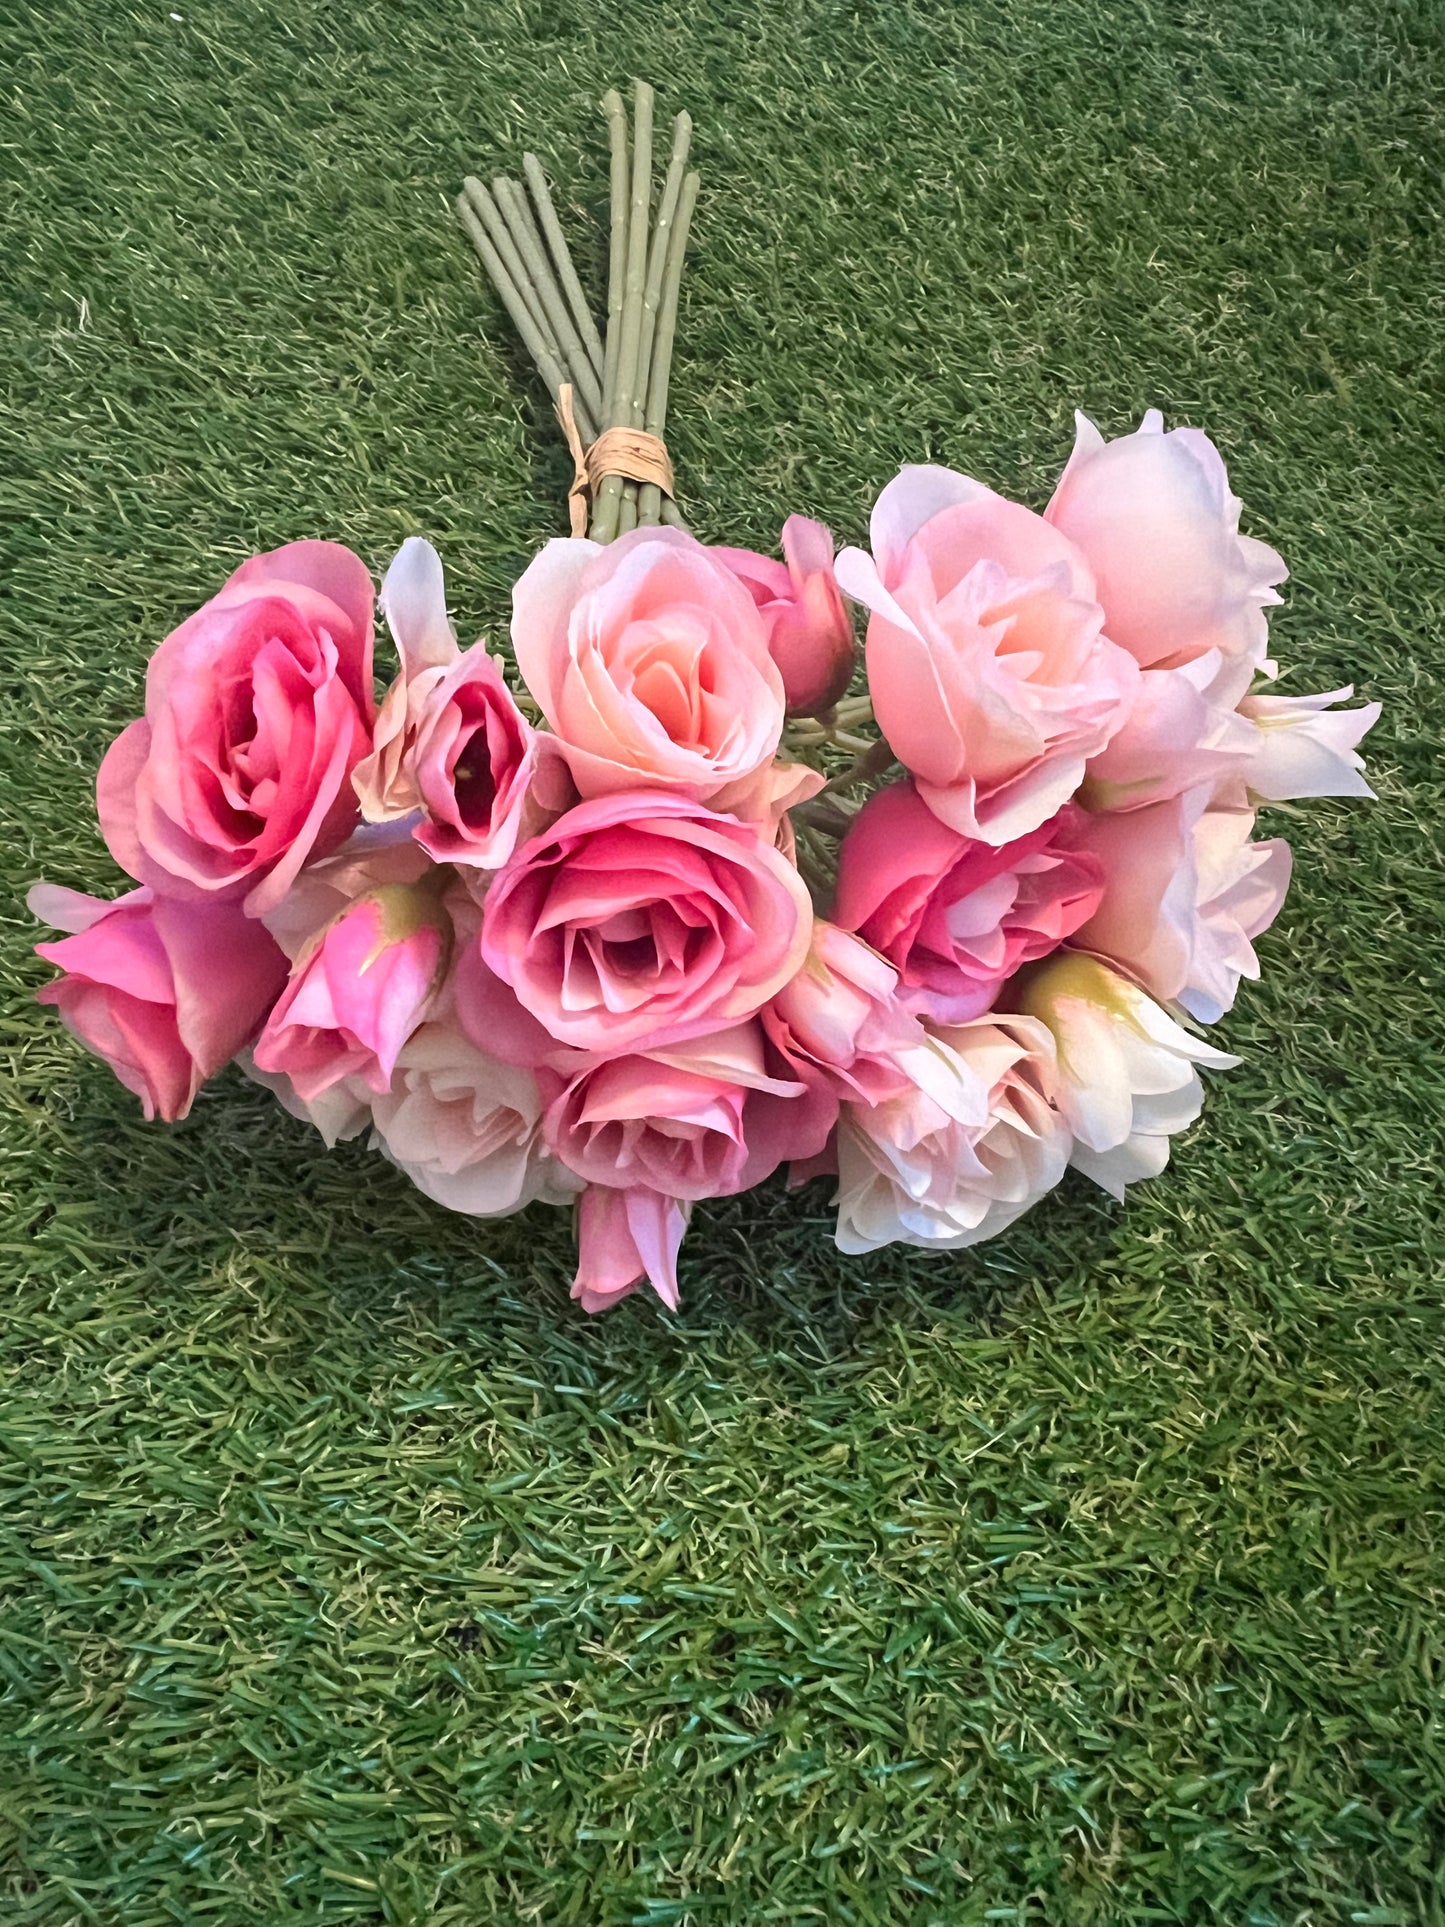 30cm MIXED SIZE MINI ROSE BUNCH PINKS